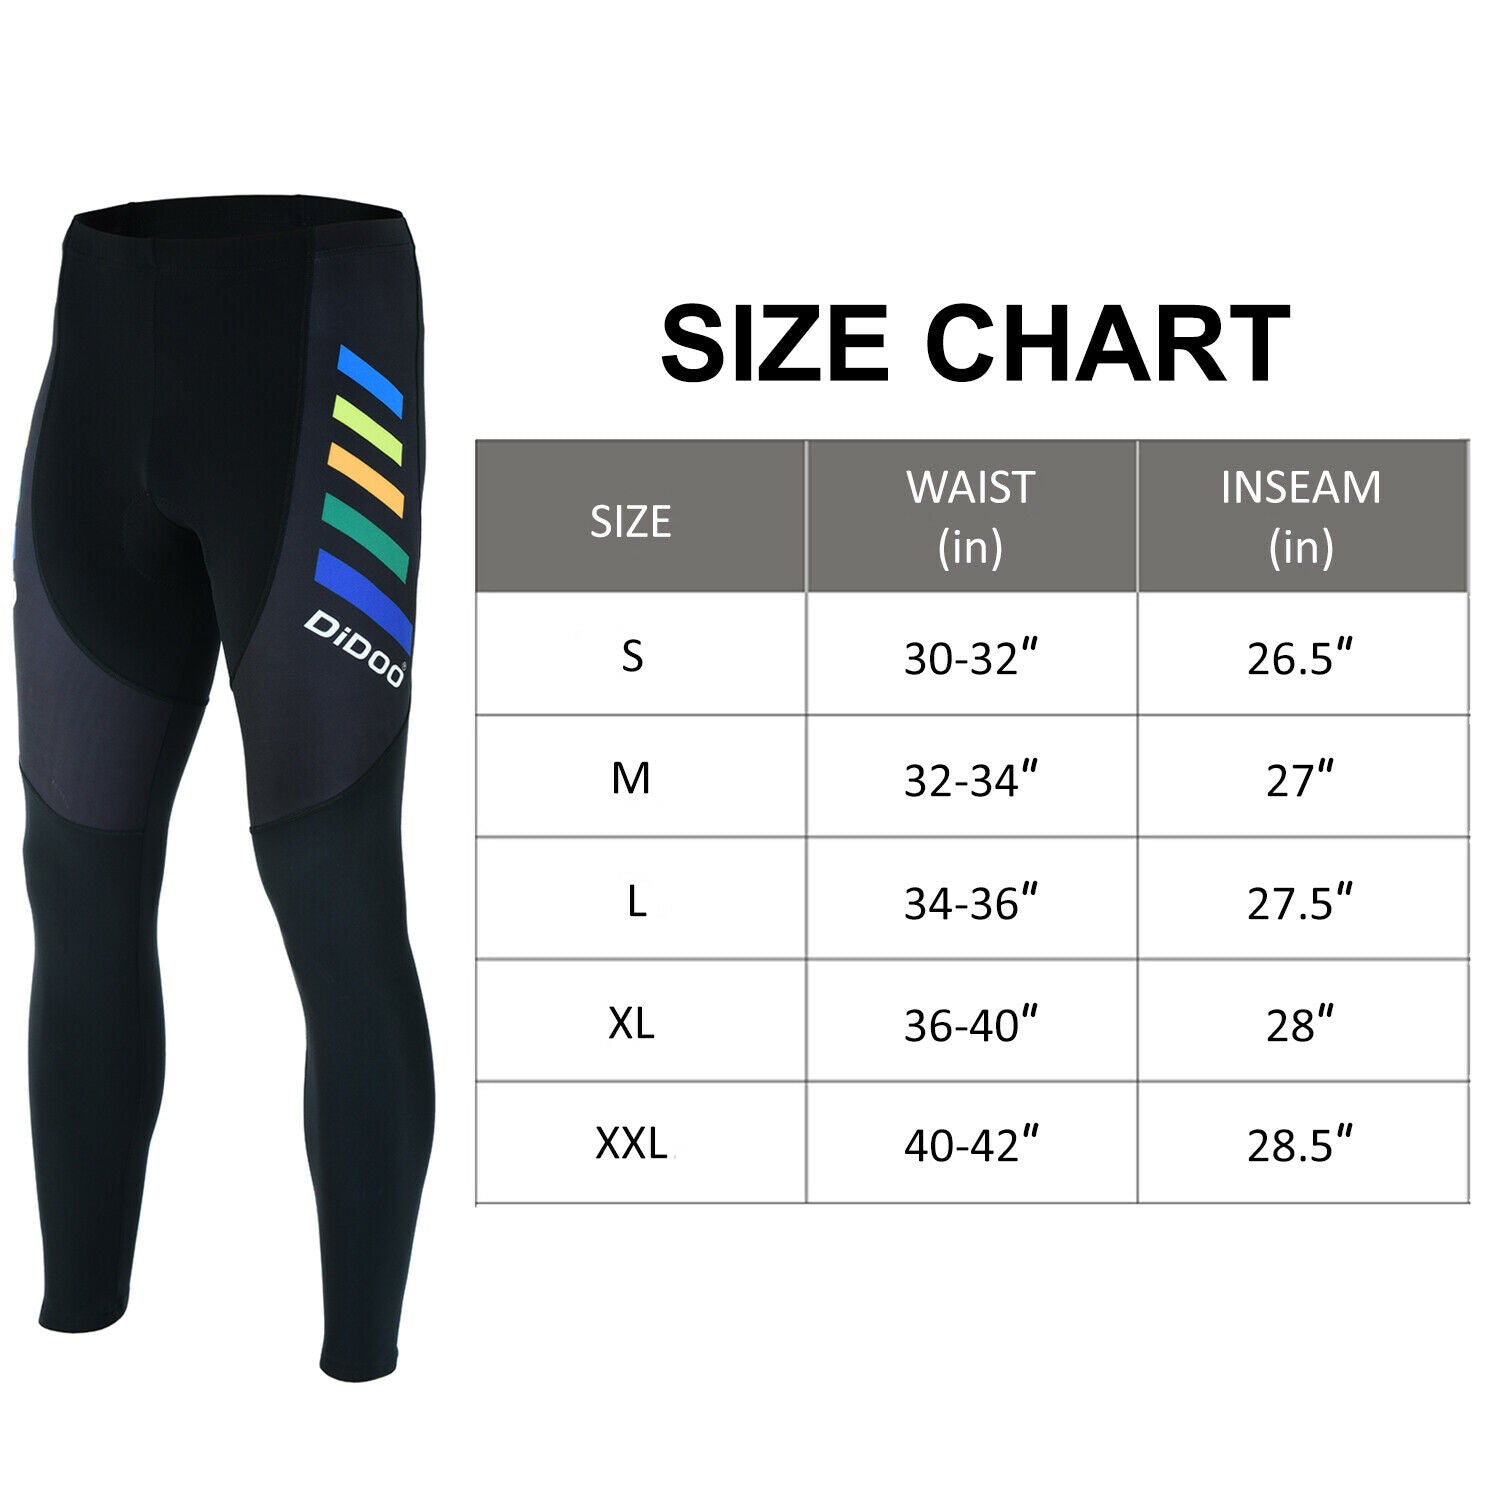 DiDoo Men's Pro Cycling Pants with padding Black and Multi Colour Strips